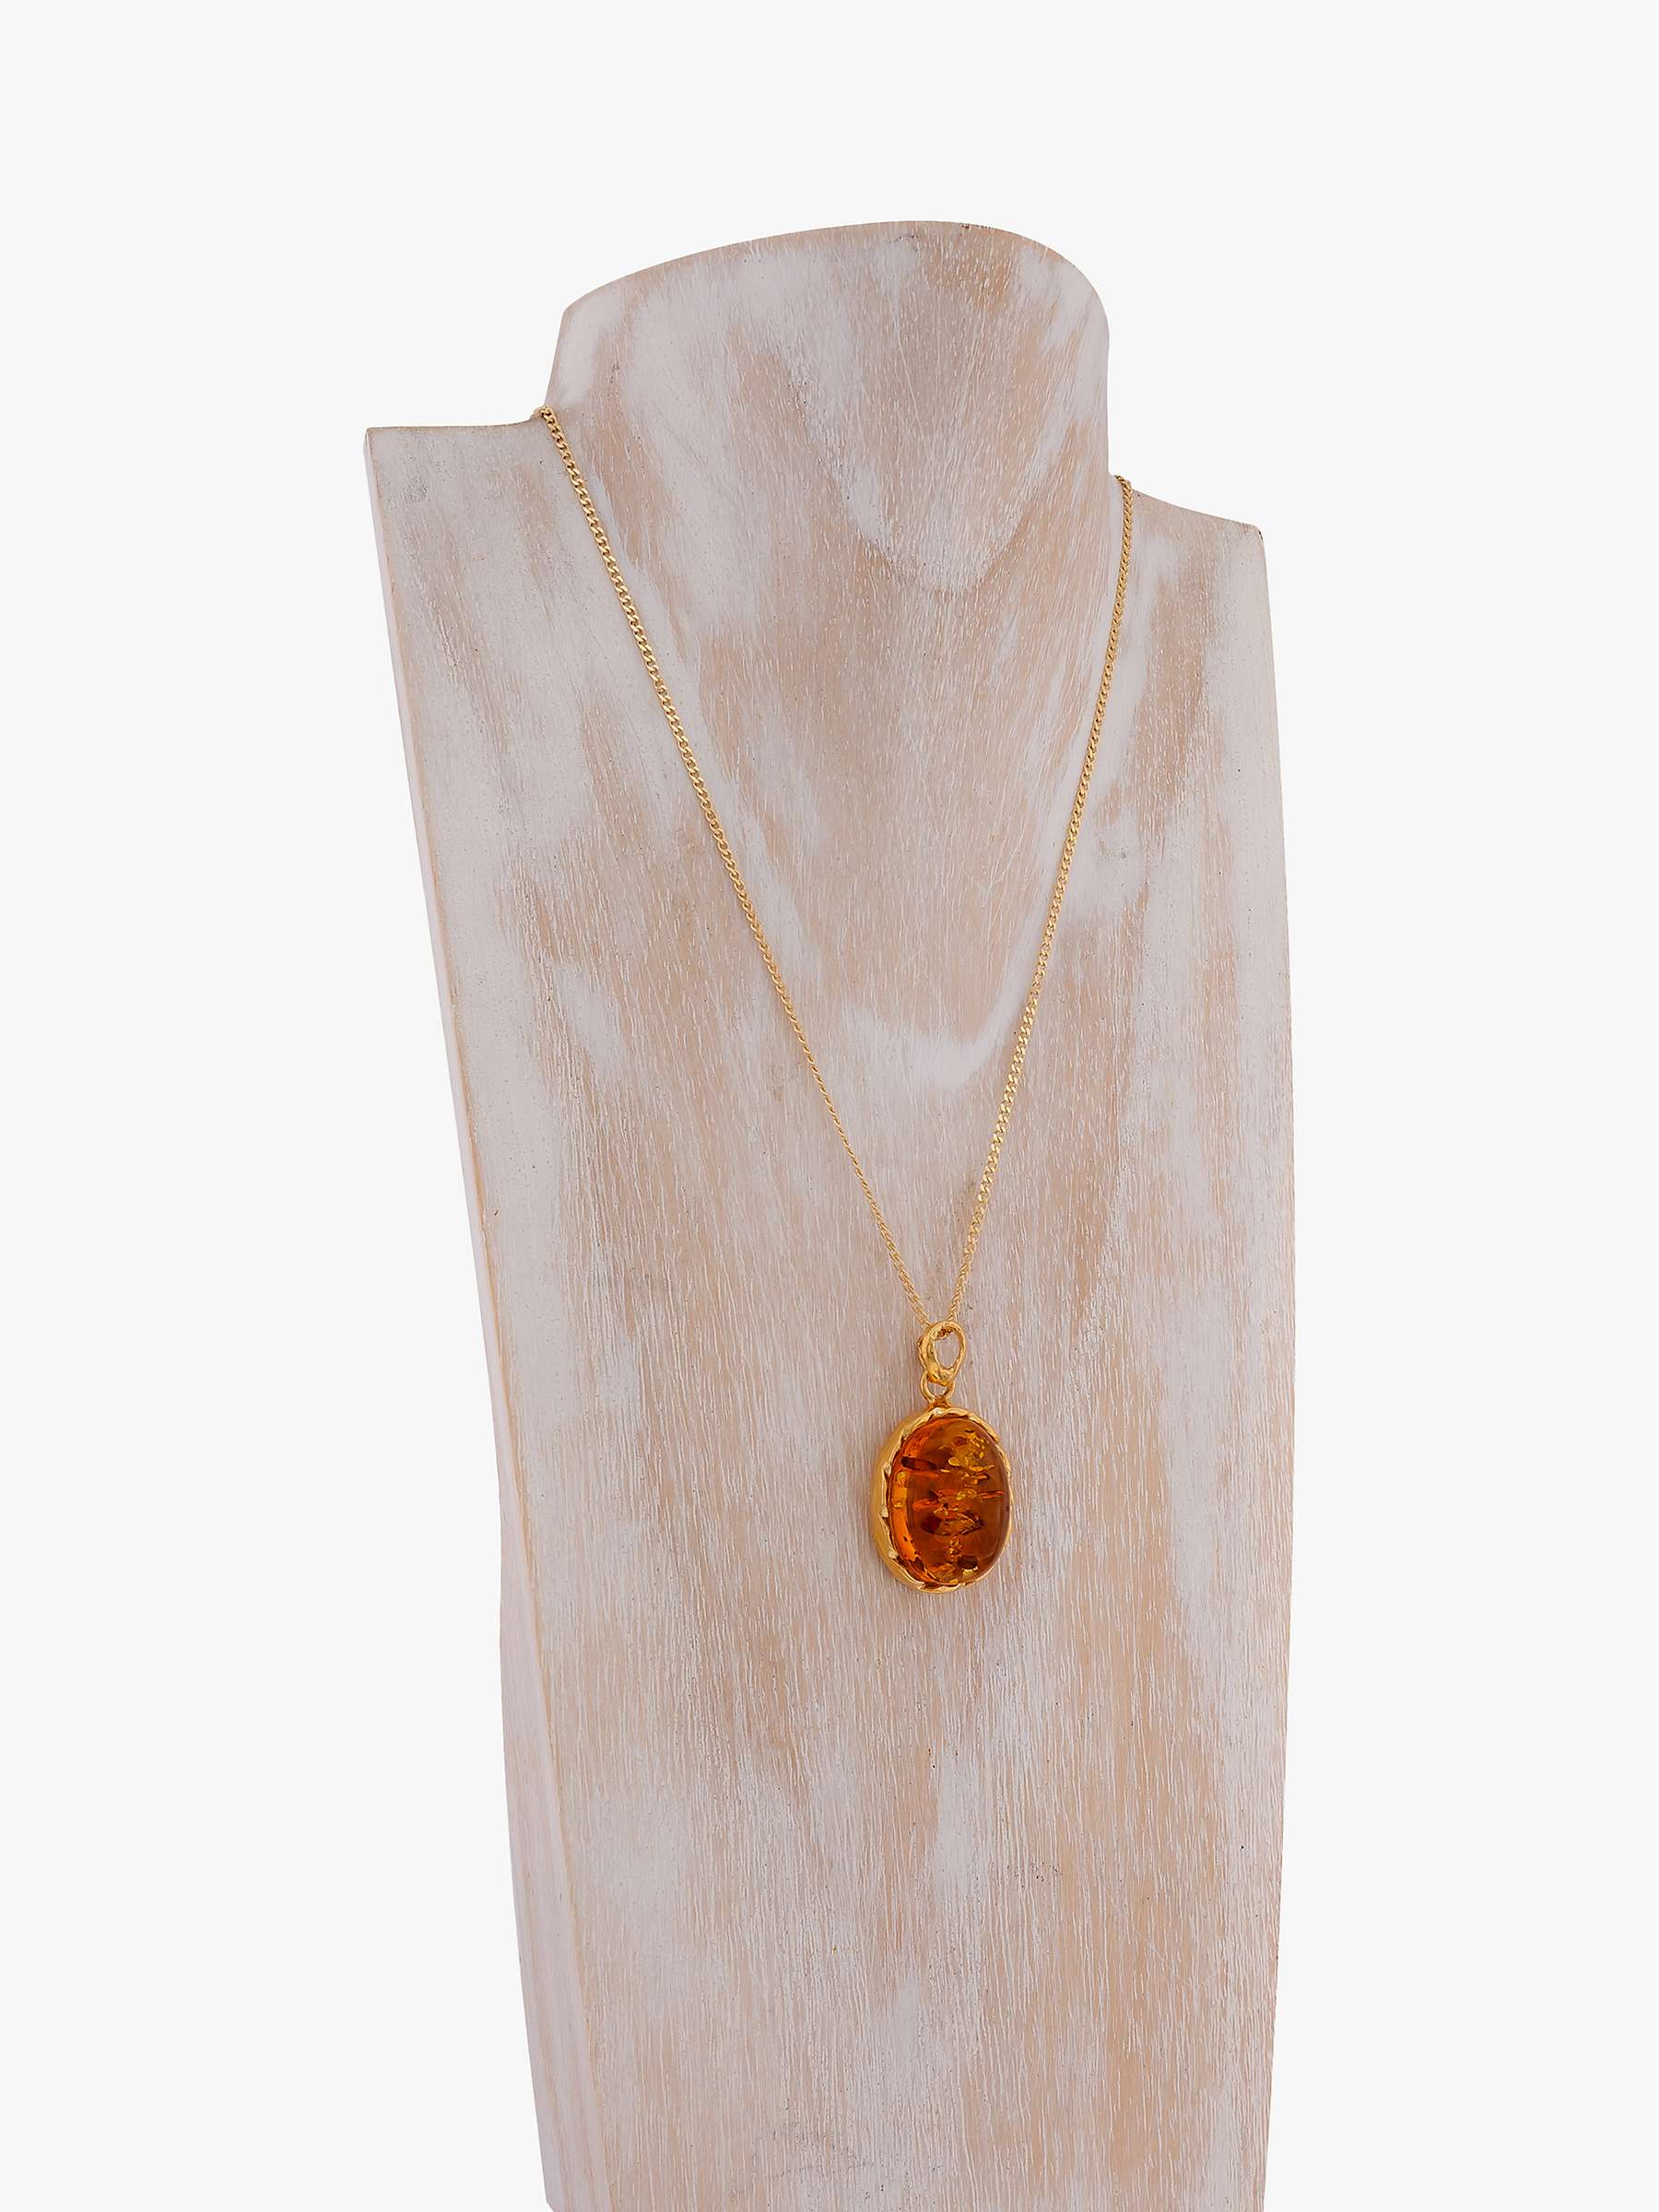 Buy Be-Jewelled Baltic Amber Pendant Necklace, Gold/Cognac Online at johnlewis.com